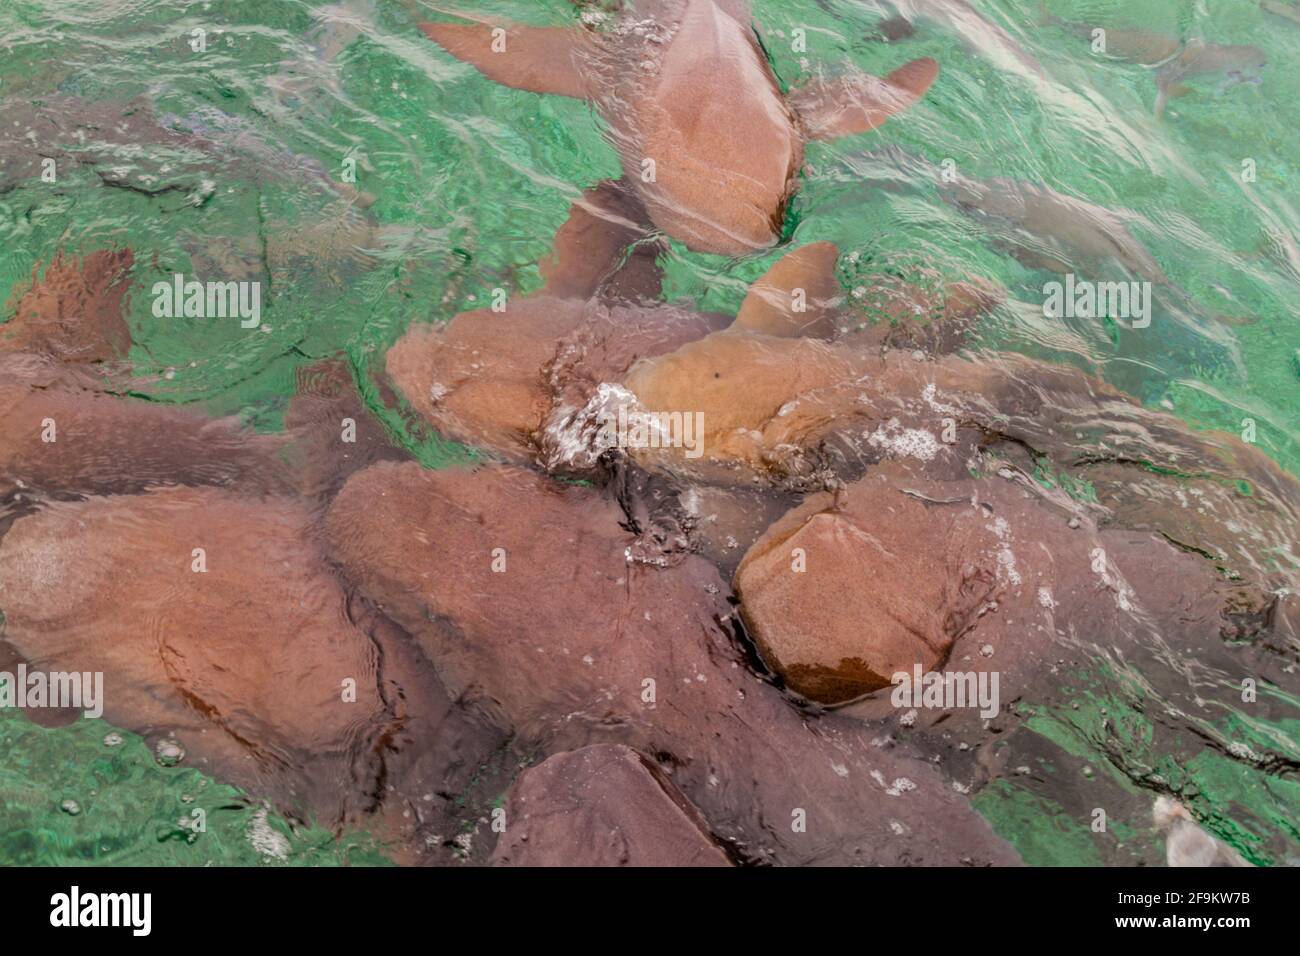 Group of nurse sharks Ginglymostoma cirratum in the Shark Ray Alley, Belize Stock Photo